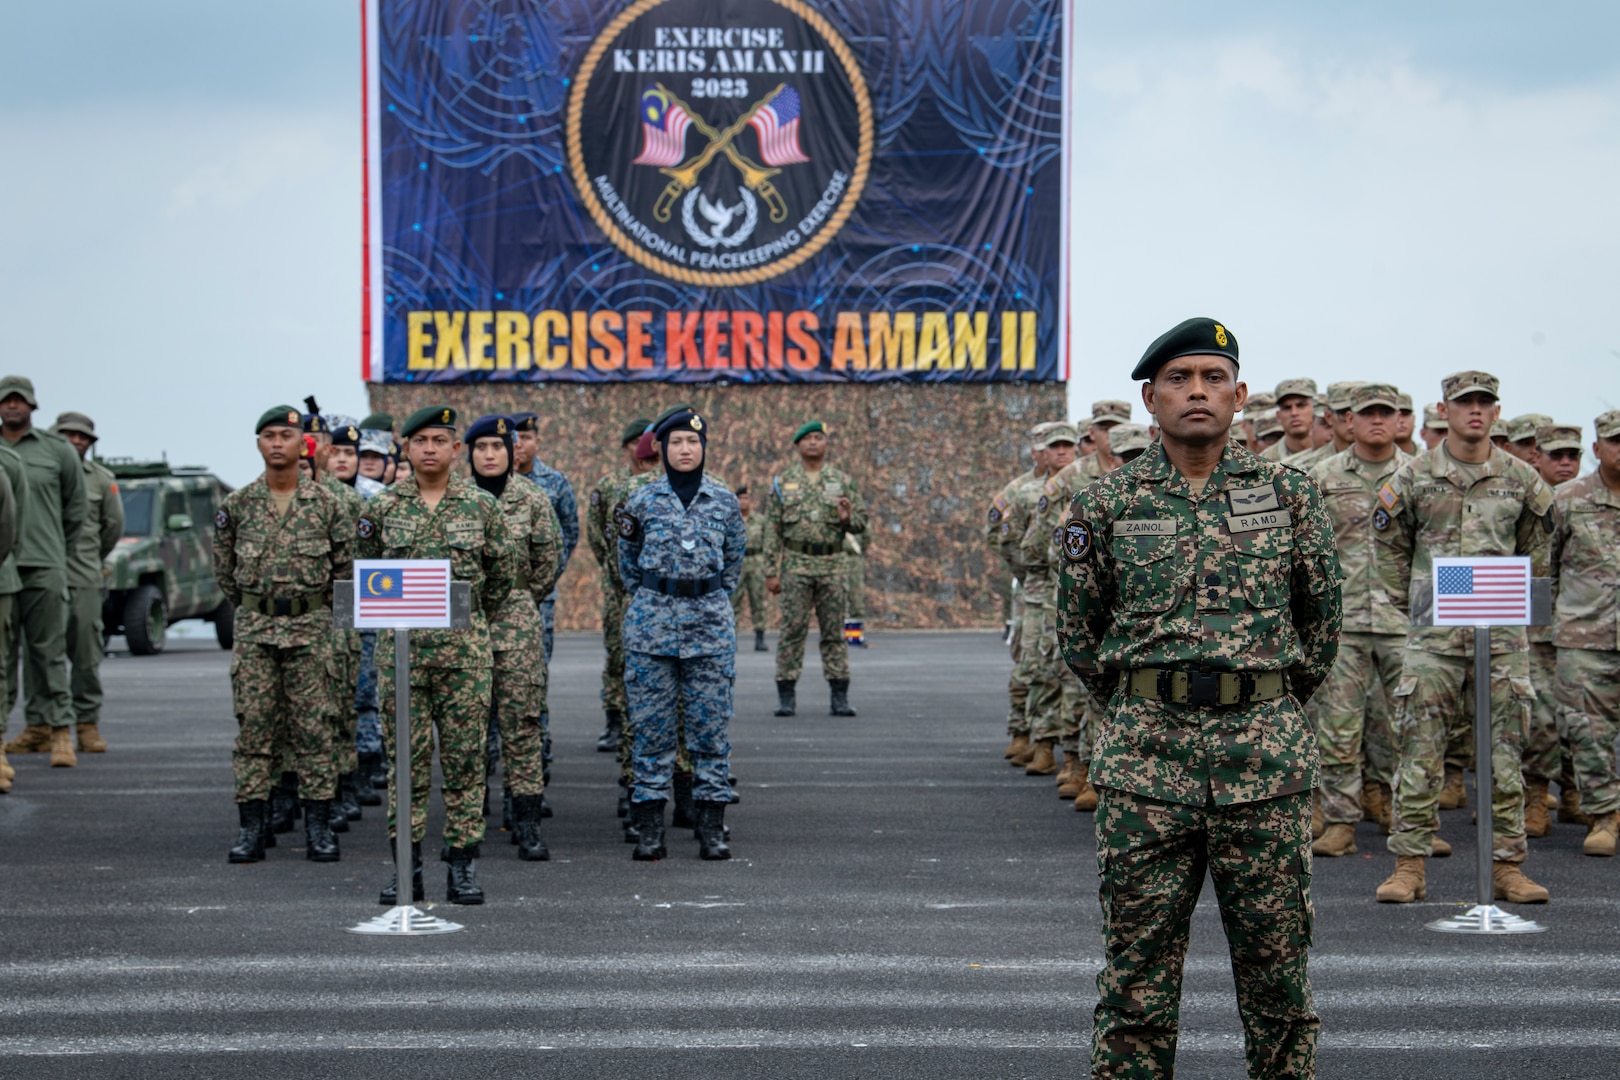 Combined service members from 19 countries participate in the opening ceremony of Exercise Keris Aman 23, a Multinational Peacekeeping Exercise, at the Malaysian Peacekeeping Centre on Aug. 13, 2023. . Keris Aman 2023 is a multinational United Nations Peacekeeping (UN PKO) exercise conducted in Malaysia and co-sponsored by U.S. Indo-Pacific Command and the Malaysian Armed Forces. The exercise is designed to strengthen military-to-military relationships and enhance the core PKO competencies of all participants in accordance with UN doctrine. (U.S. Marine Corps photo by Lance Cpl John Hall)